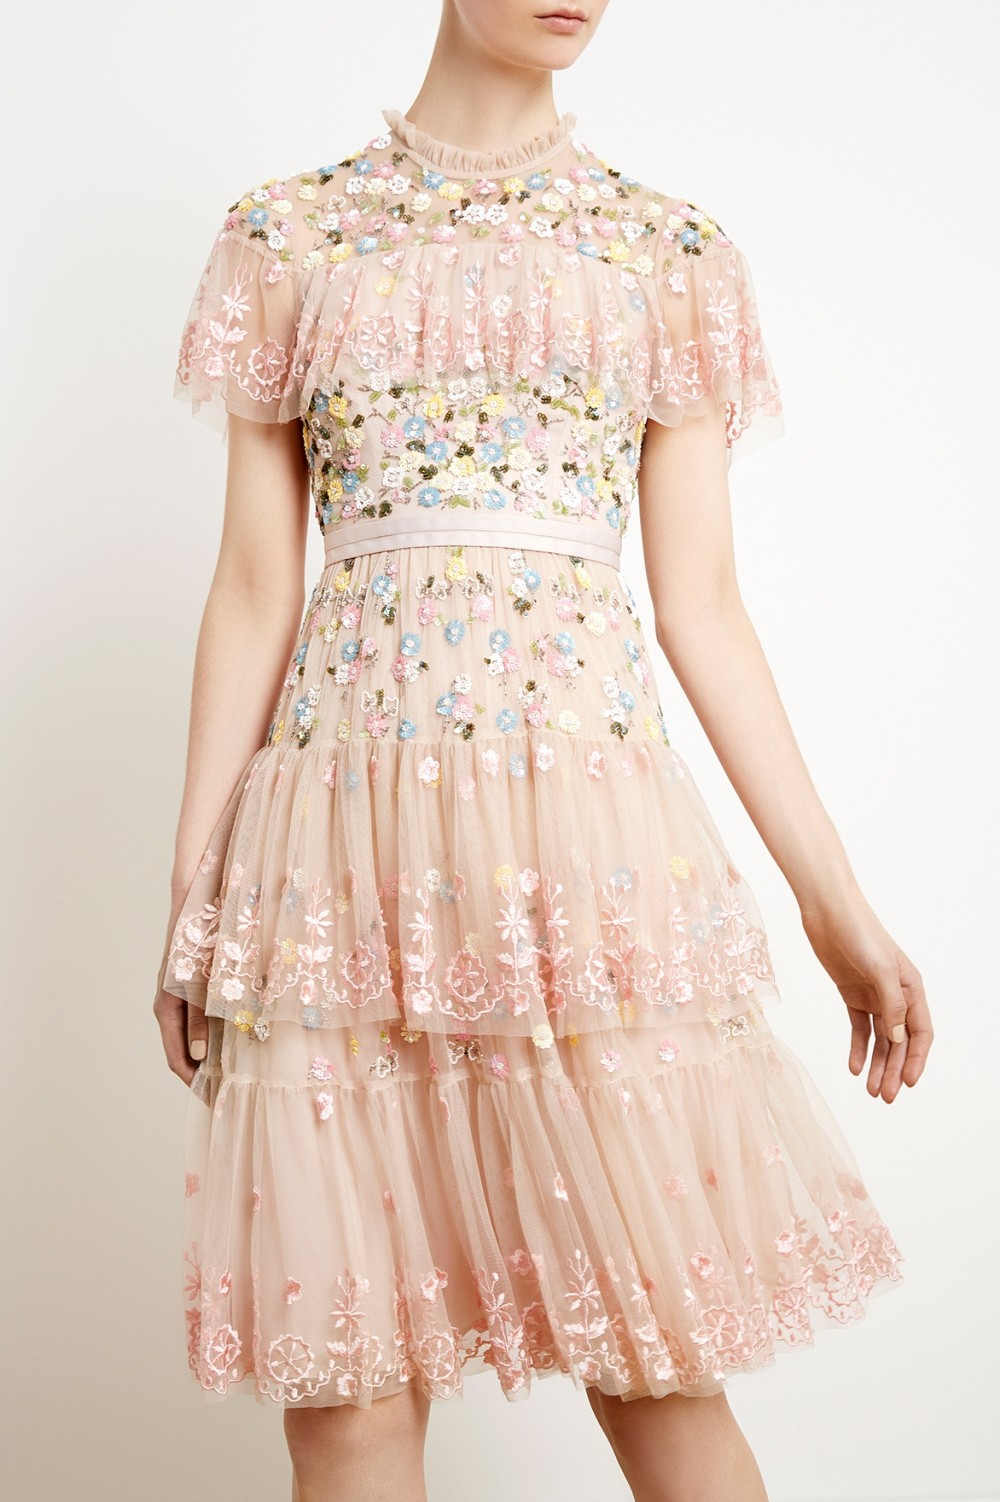 The Prettiest Tea Dress with Embroidered Flowers, Lace and Pastel Tulle